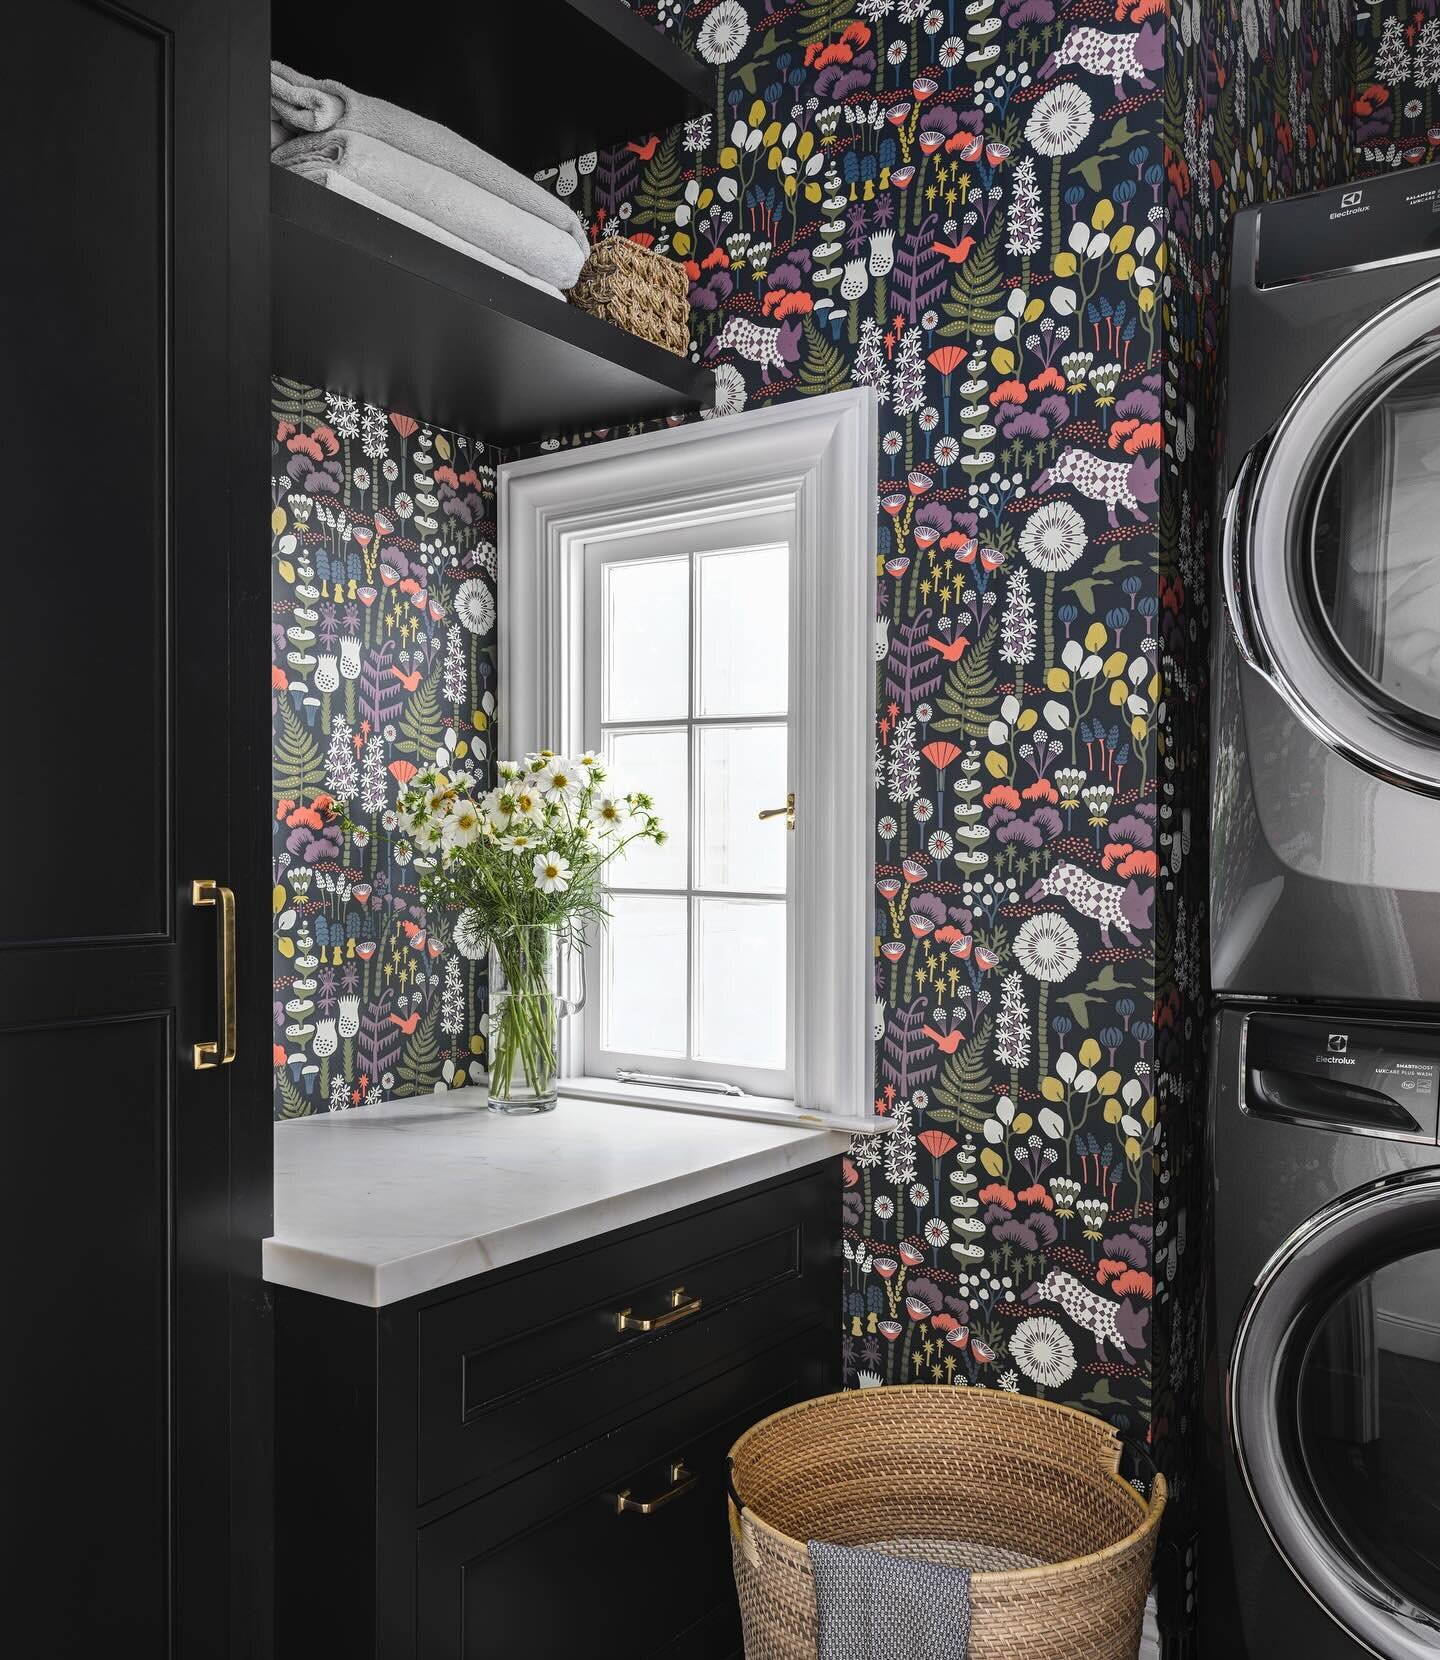 Spring has sprung 🤞 keeping it happy with this laundry room in the #Beau-arts Reno 💐 @schumacher1889 + @borastapeter 📸 @christopherstark builder: @s.melaugh_construction_  Arch: Doma Architecture  Styling: @fashawn1  #laundryroom #interiordesign #